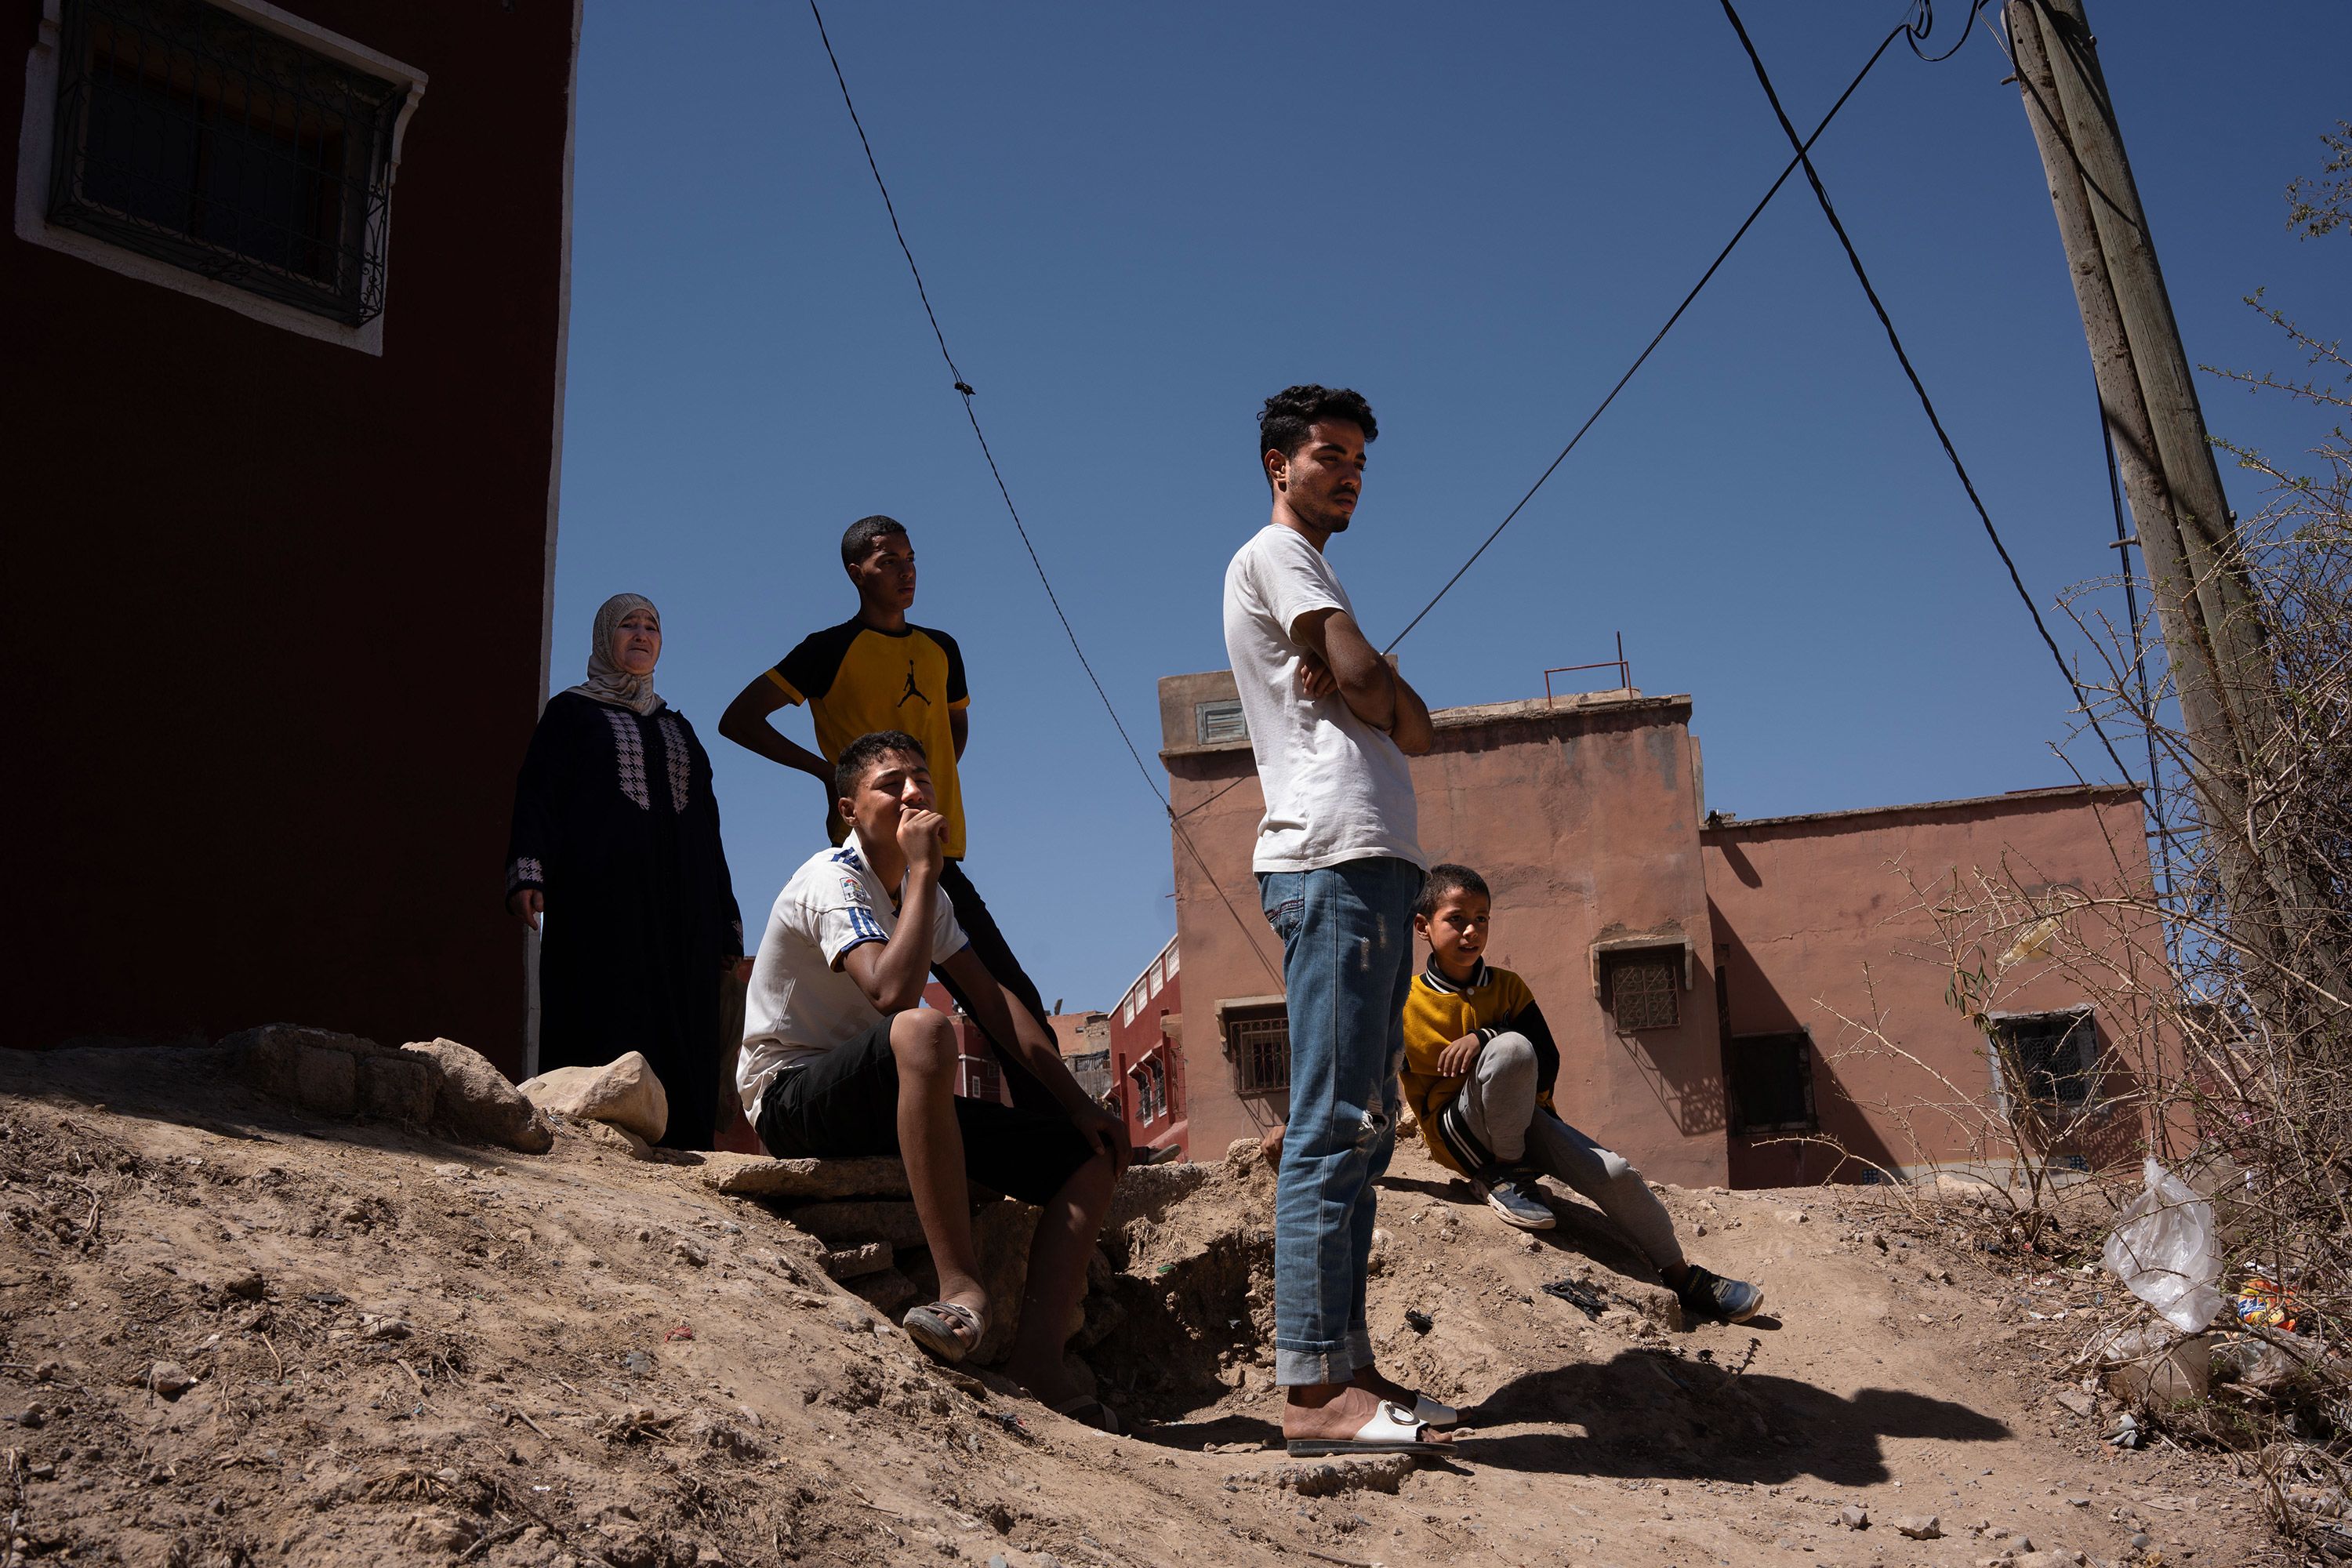 Relatives and neighbors of Lhssan Asoki look at the destroyed house where Asoki's wife and his three children died in Moulay Brahim, Morocco.